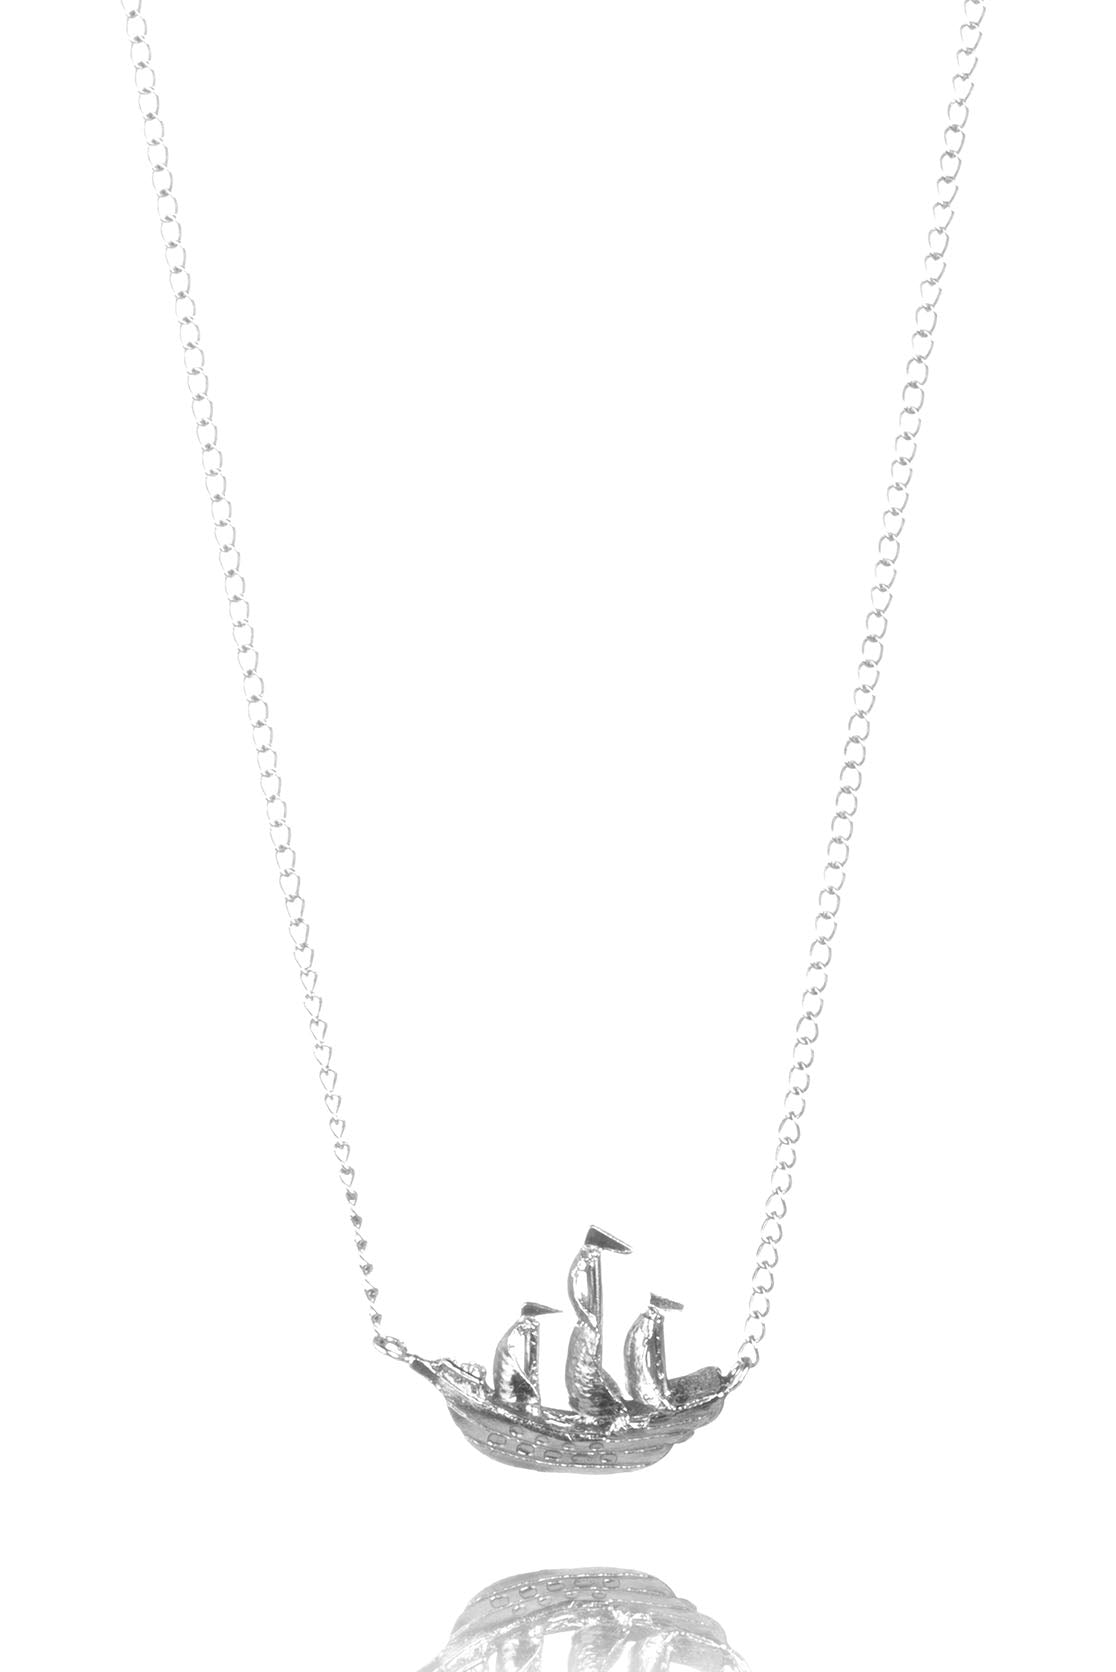 Solid sterling silver ship necklace on a white background